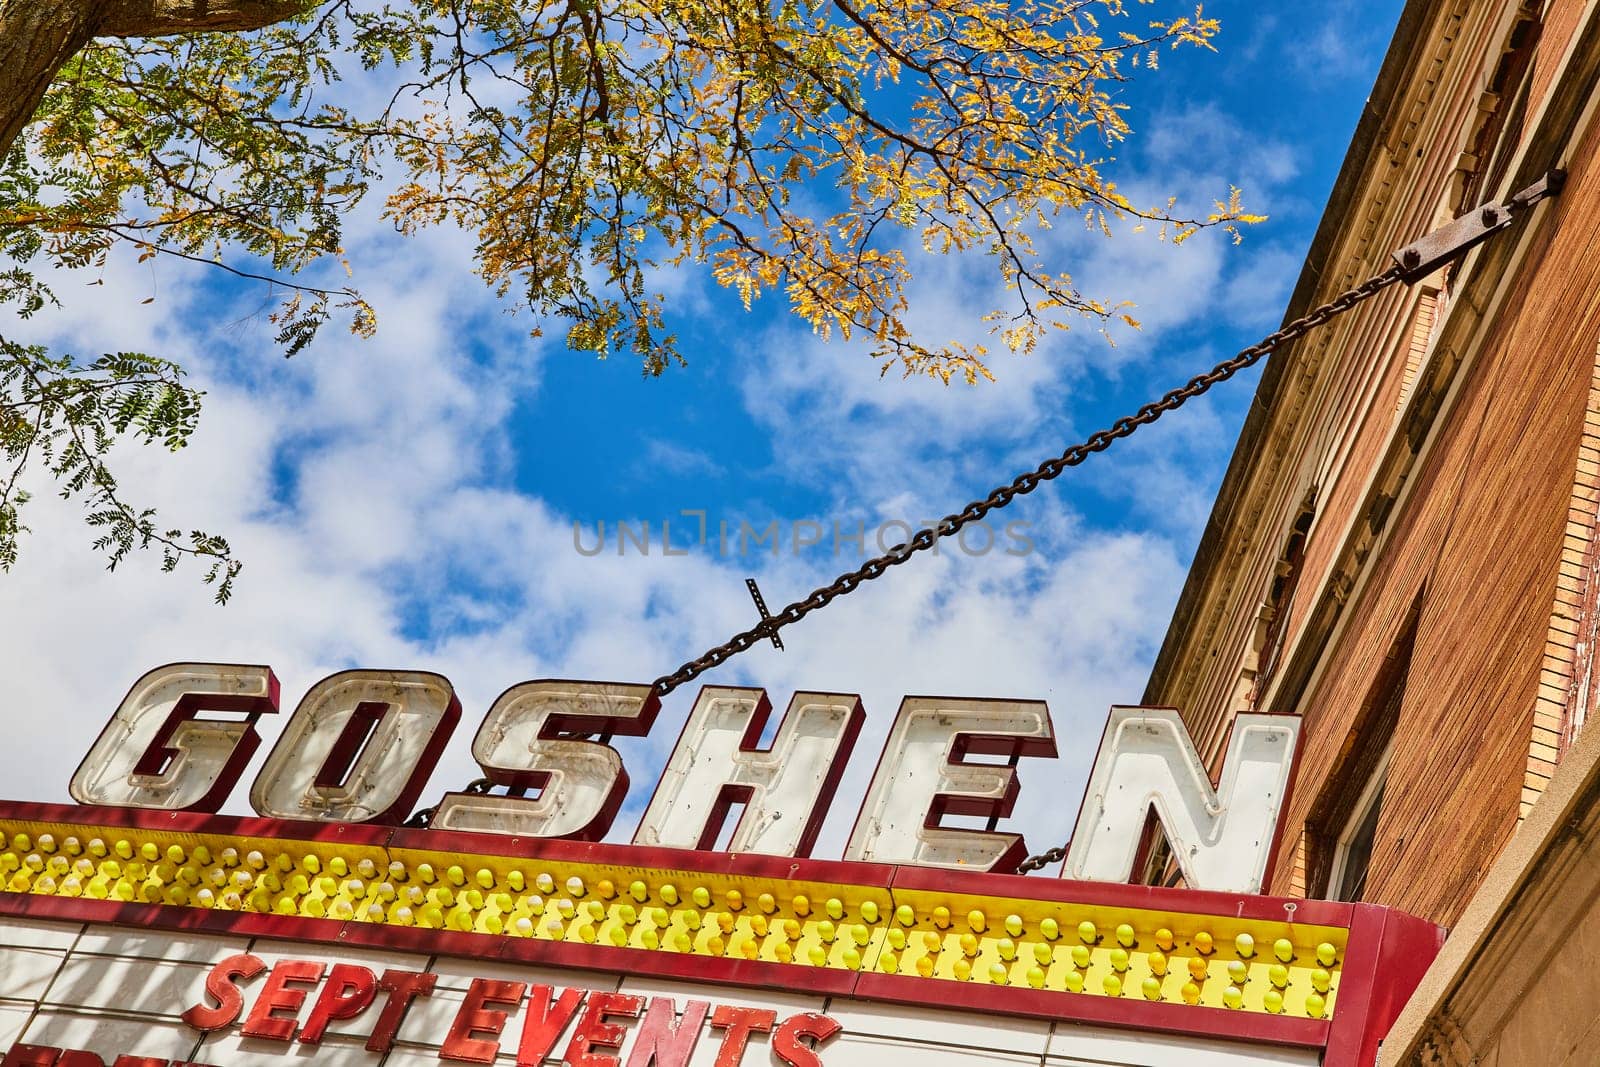 Goshen theater sign on bright, sunny summer day with blue sky and white clouds, Indiana by njproductions